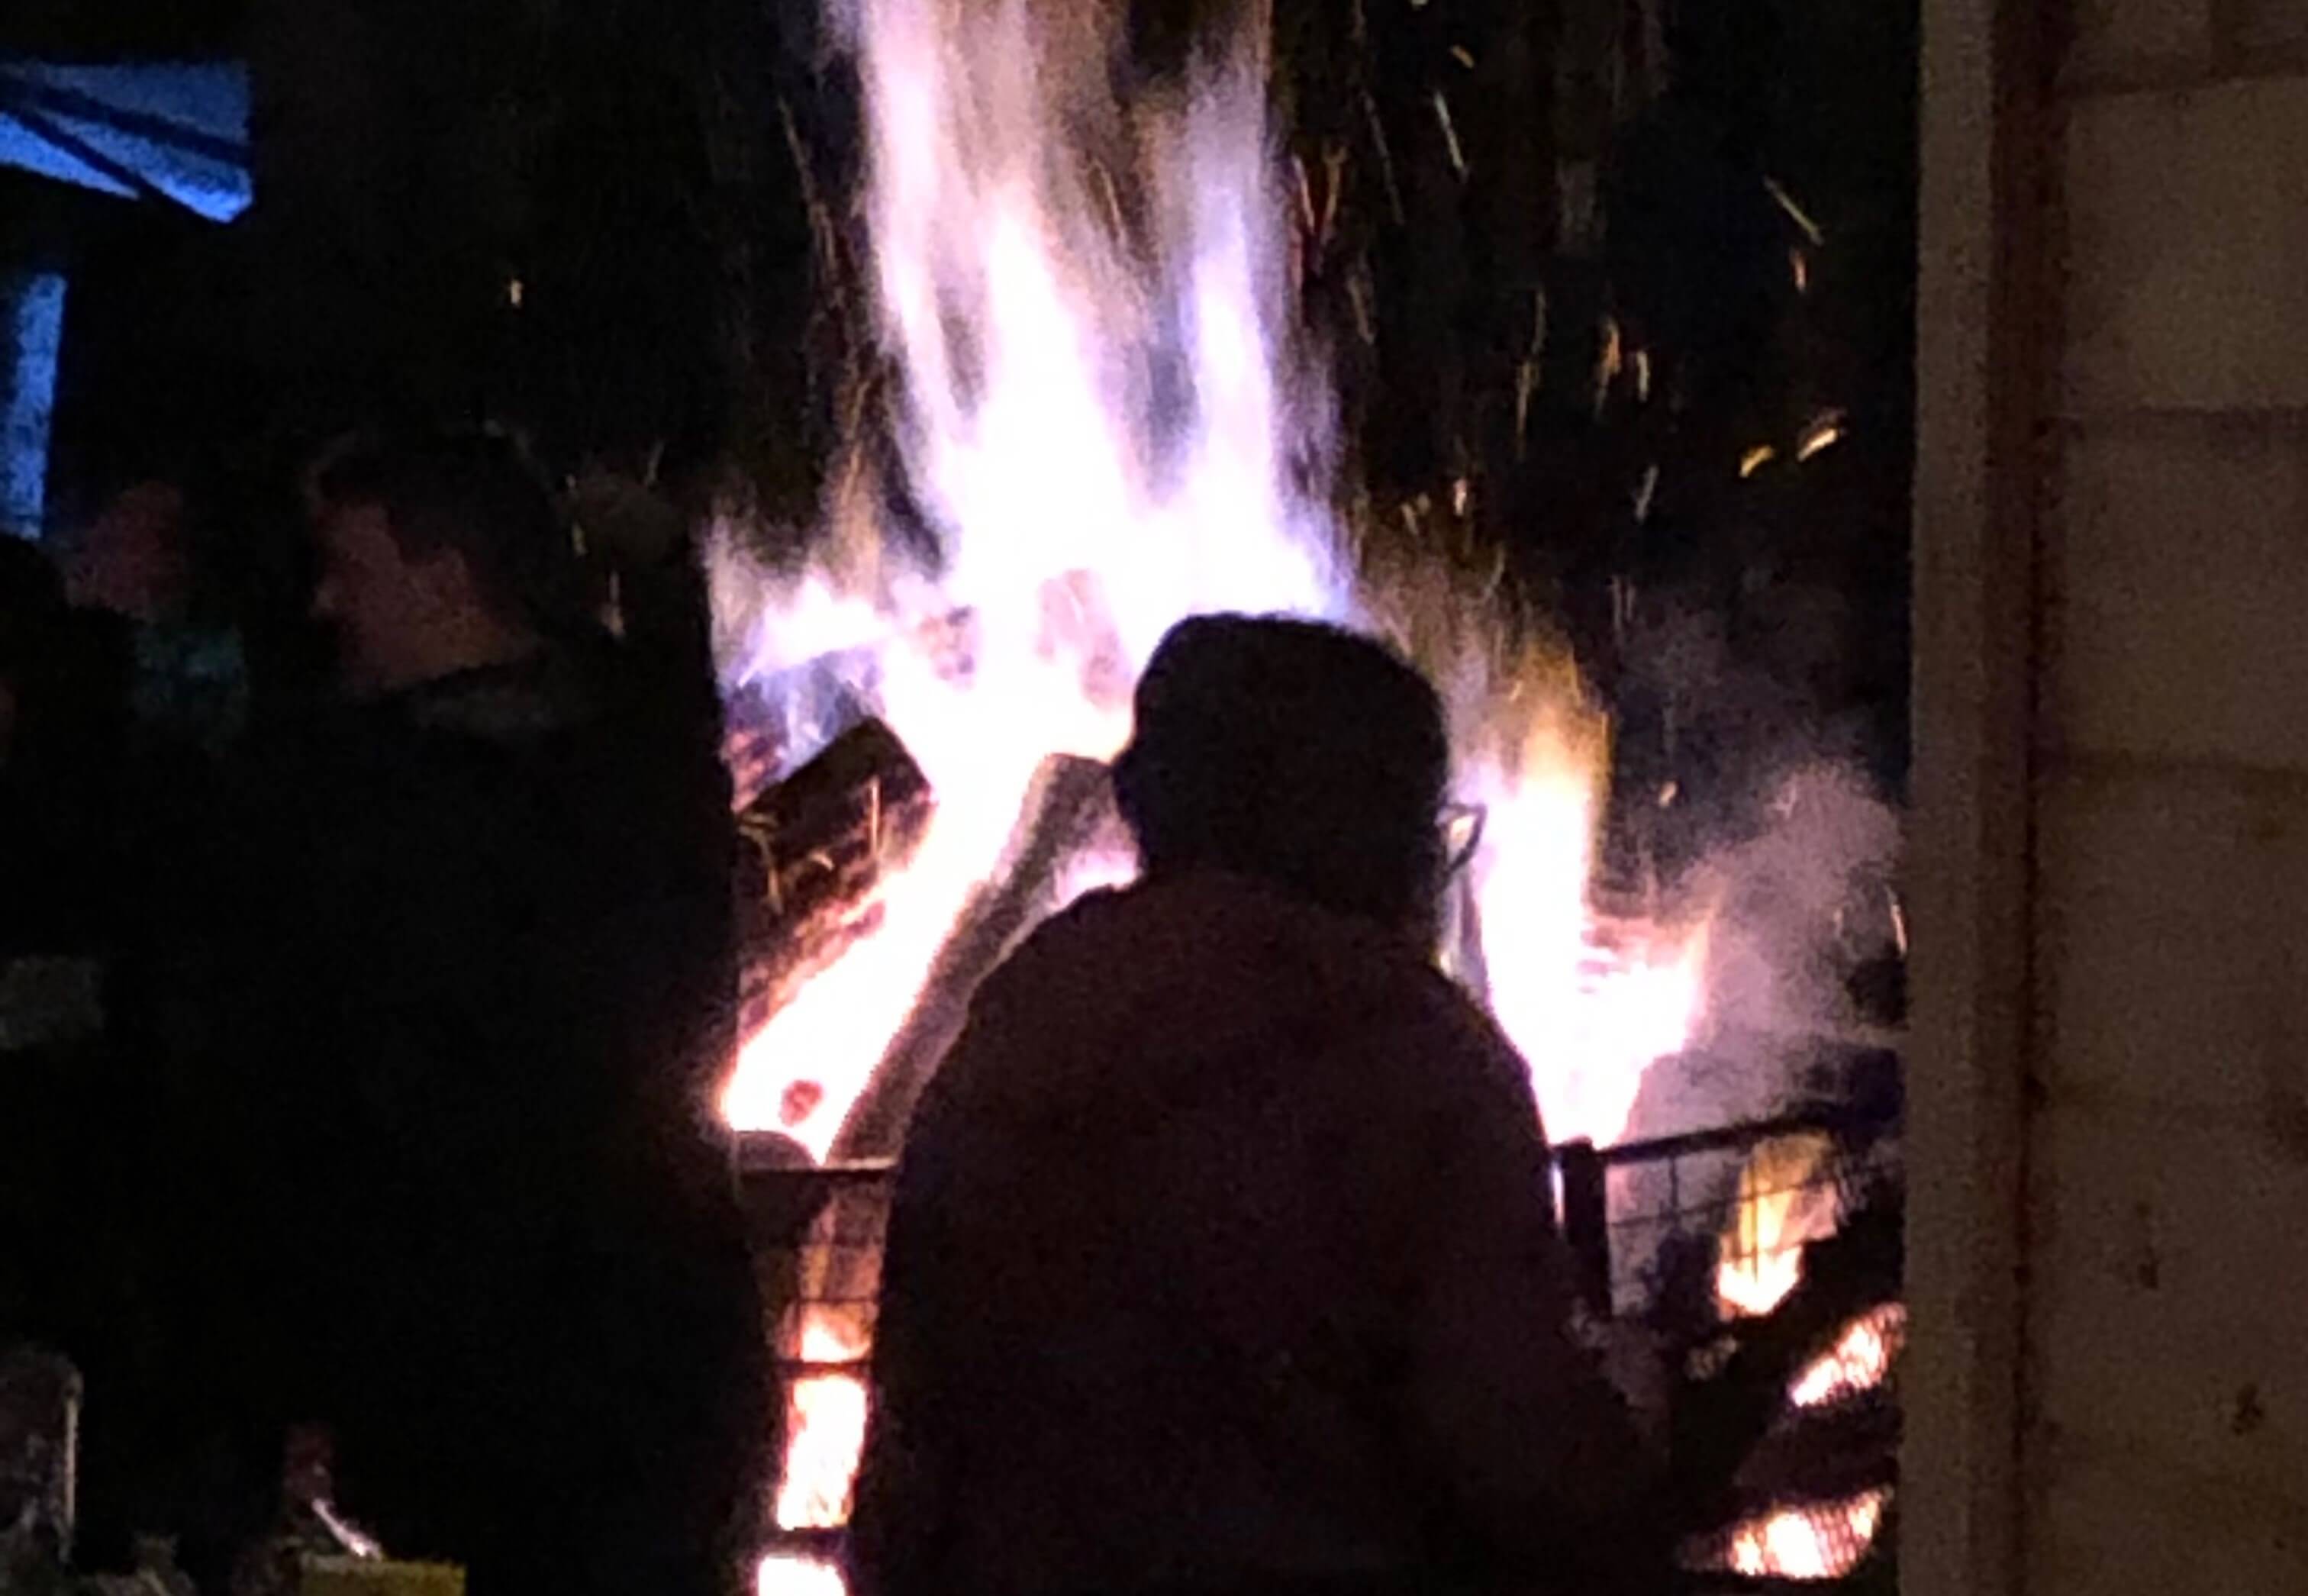 A Fire In The Rain At Clearwater Trading Campground - SOUNDfonix Entertainment Aug 24, 2019 copy.jpg (1)